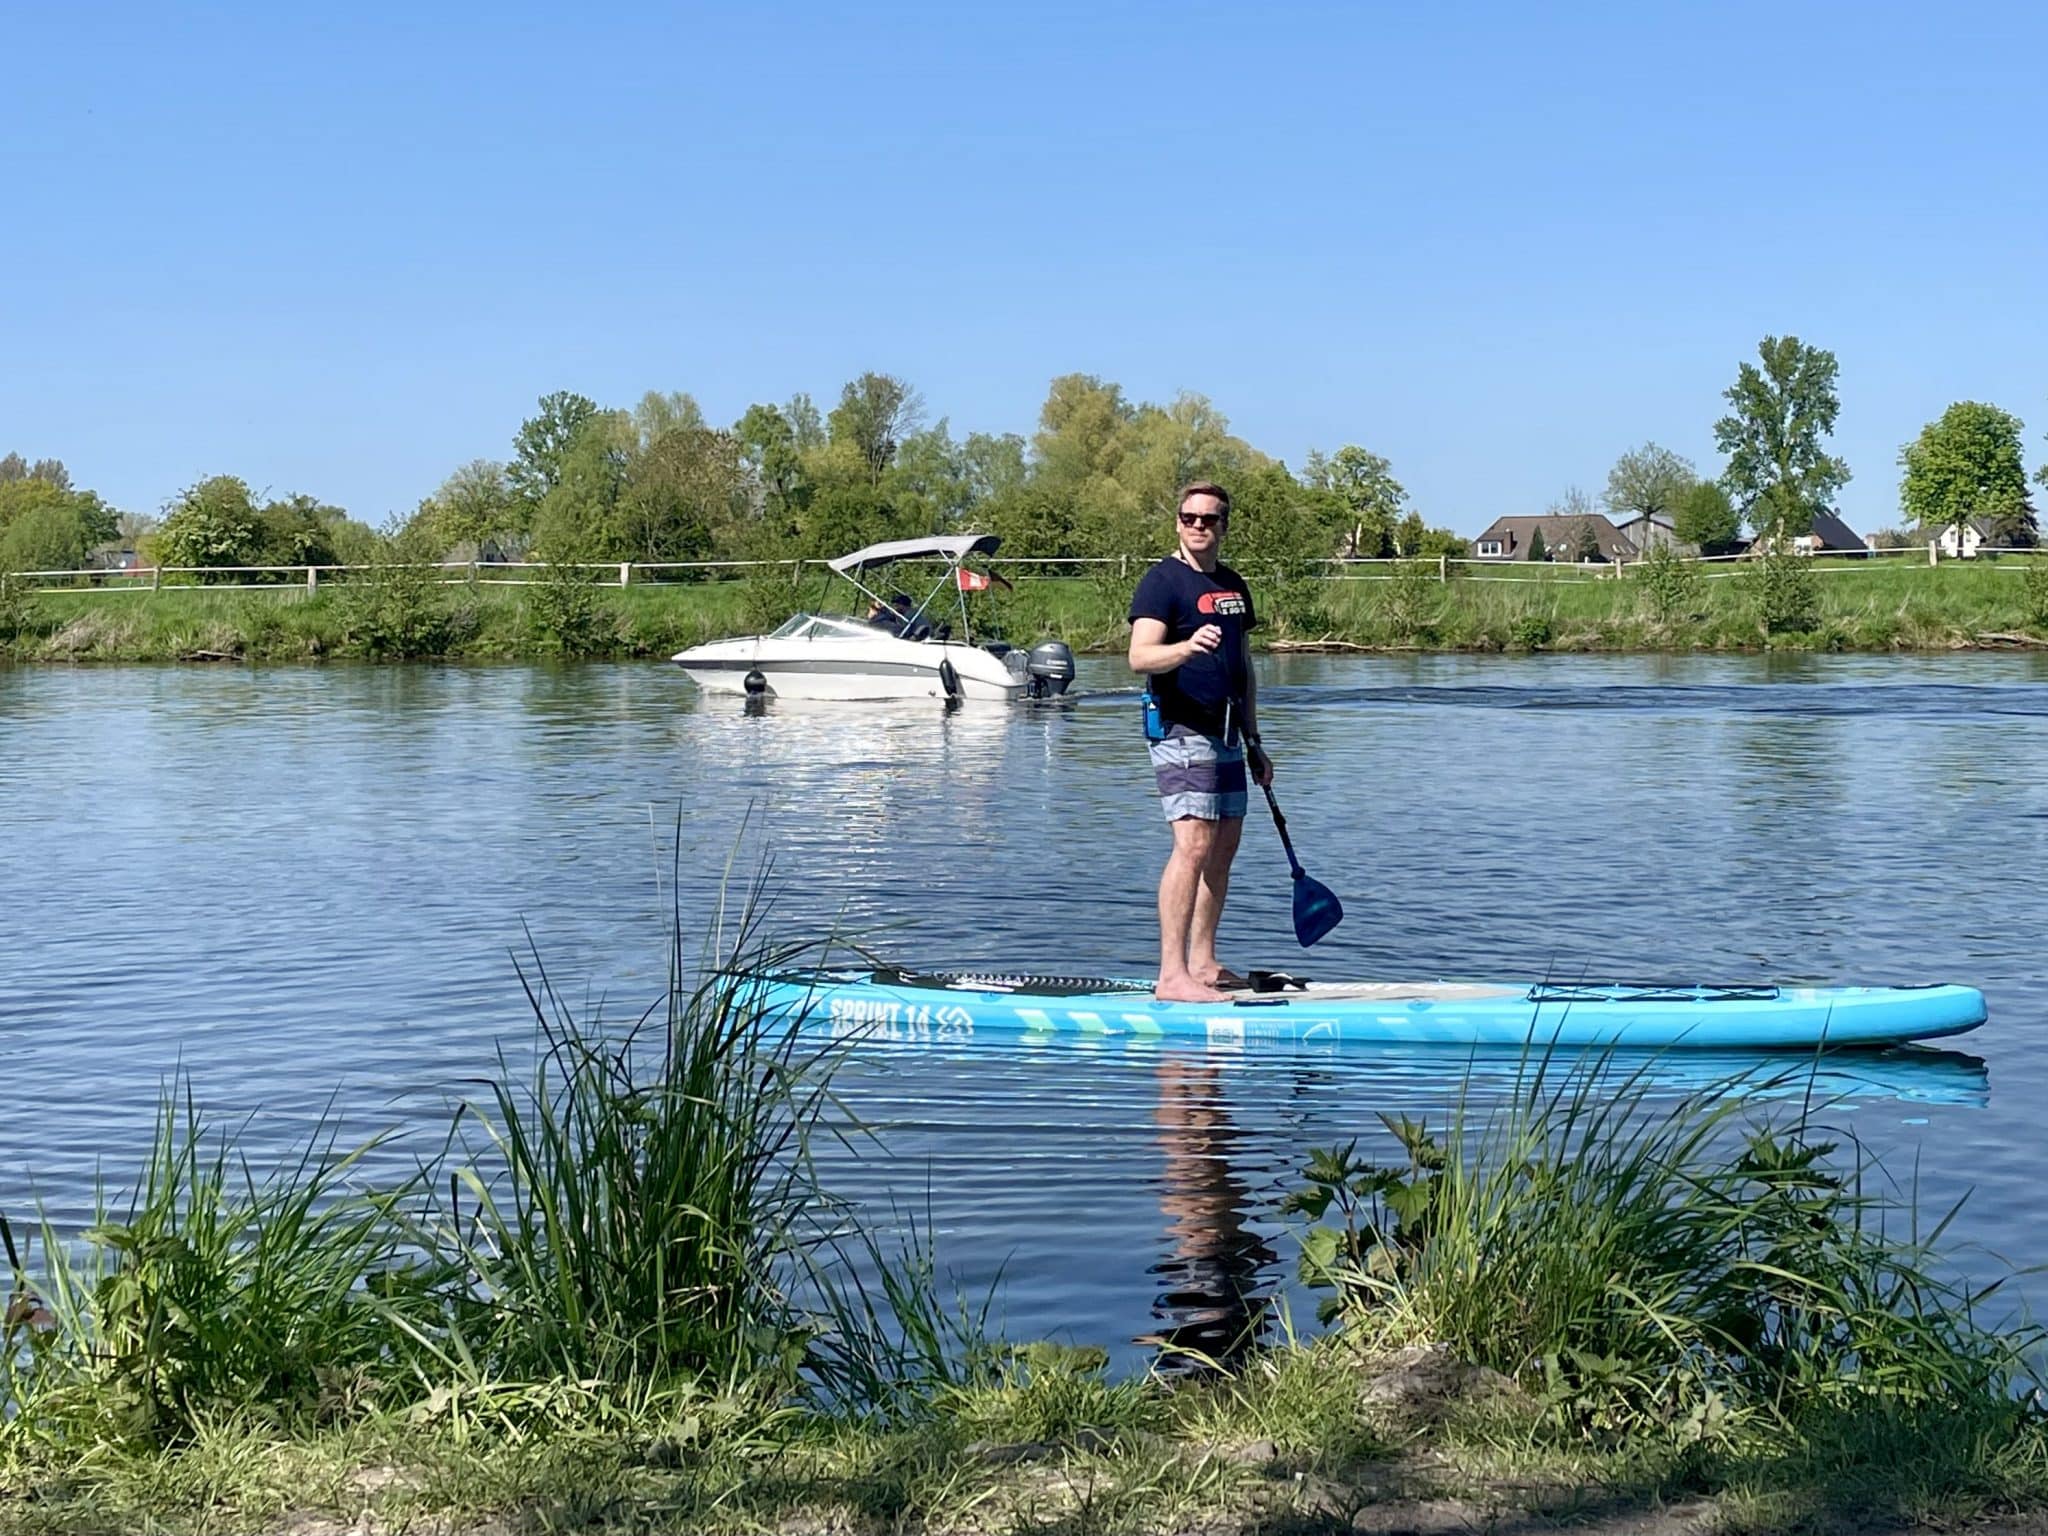 Bluefin SUP test & experiences – tried out 14′ sprint touring racing model